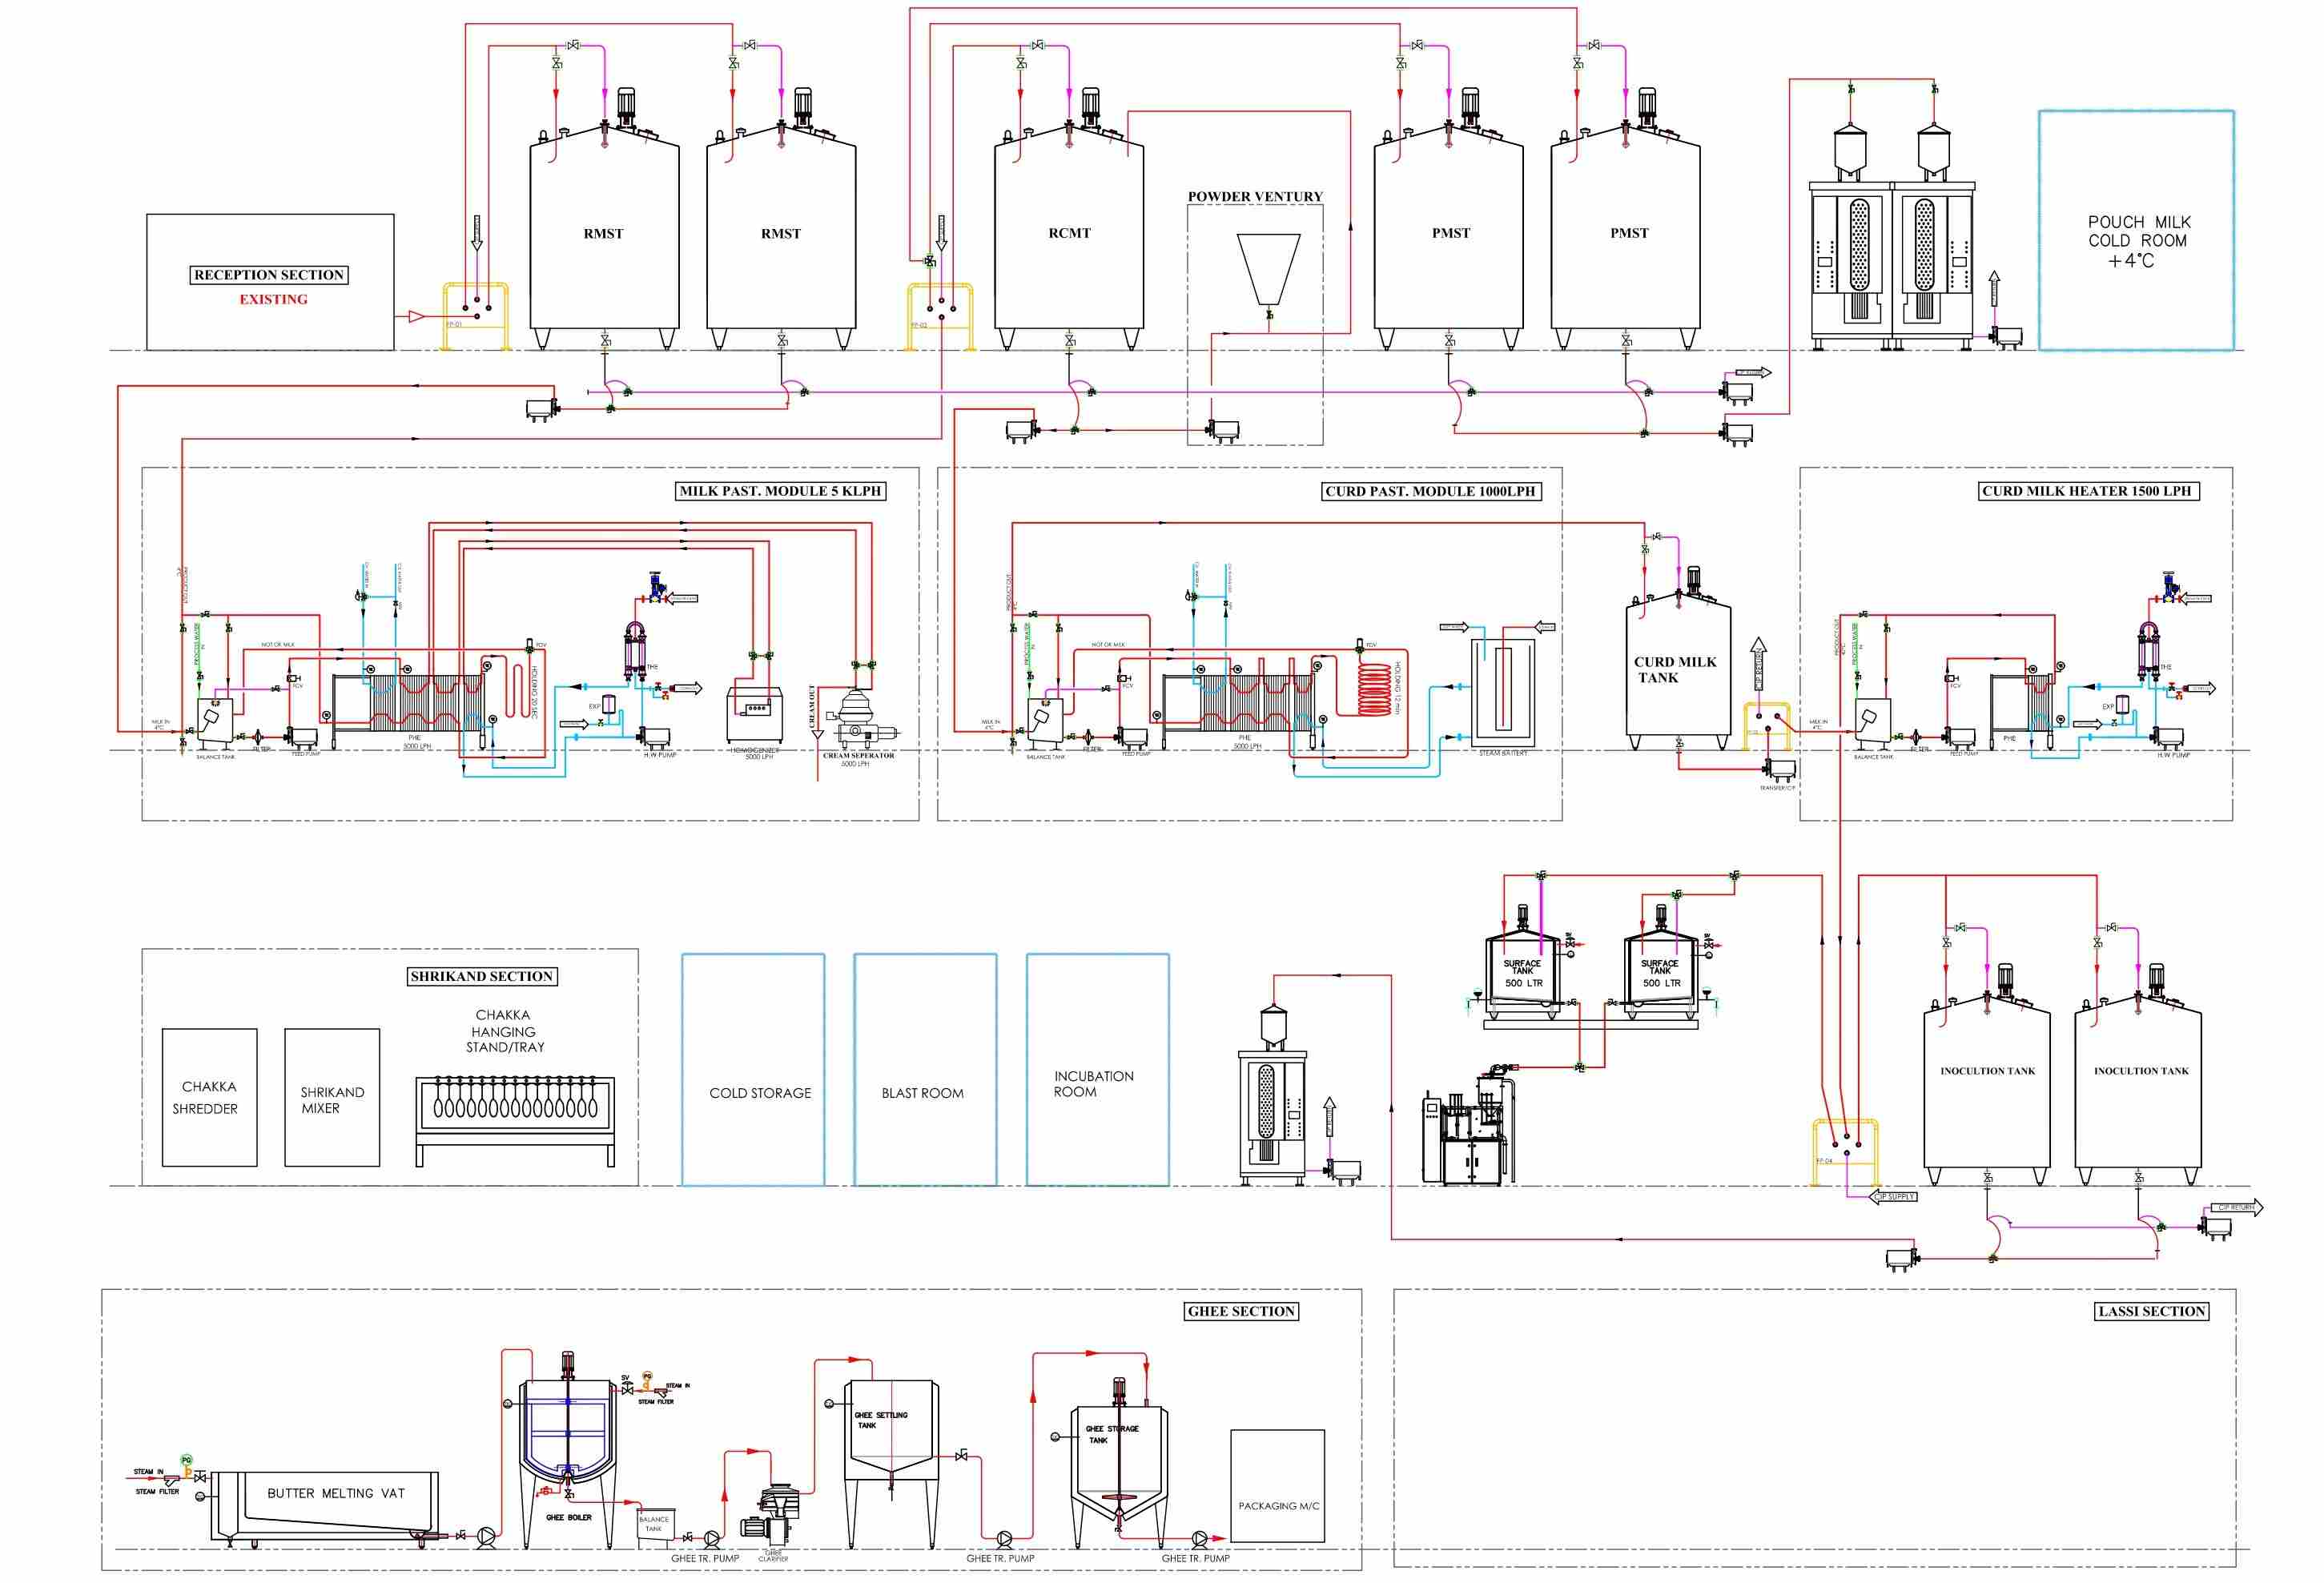 Layout design of dairy manufacturing and milk processing plant